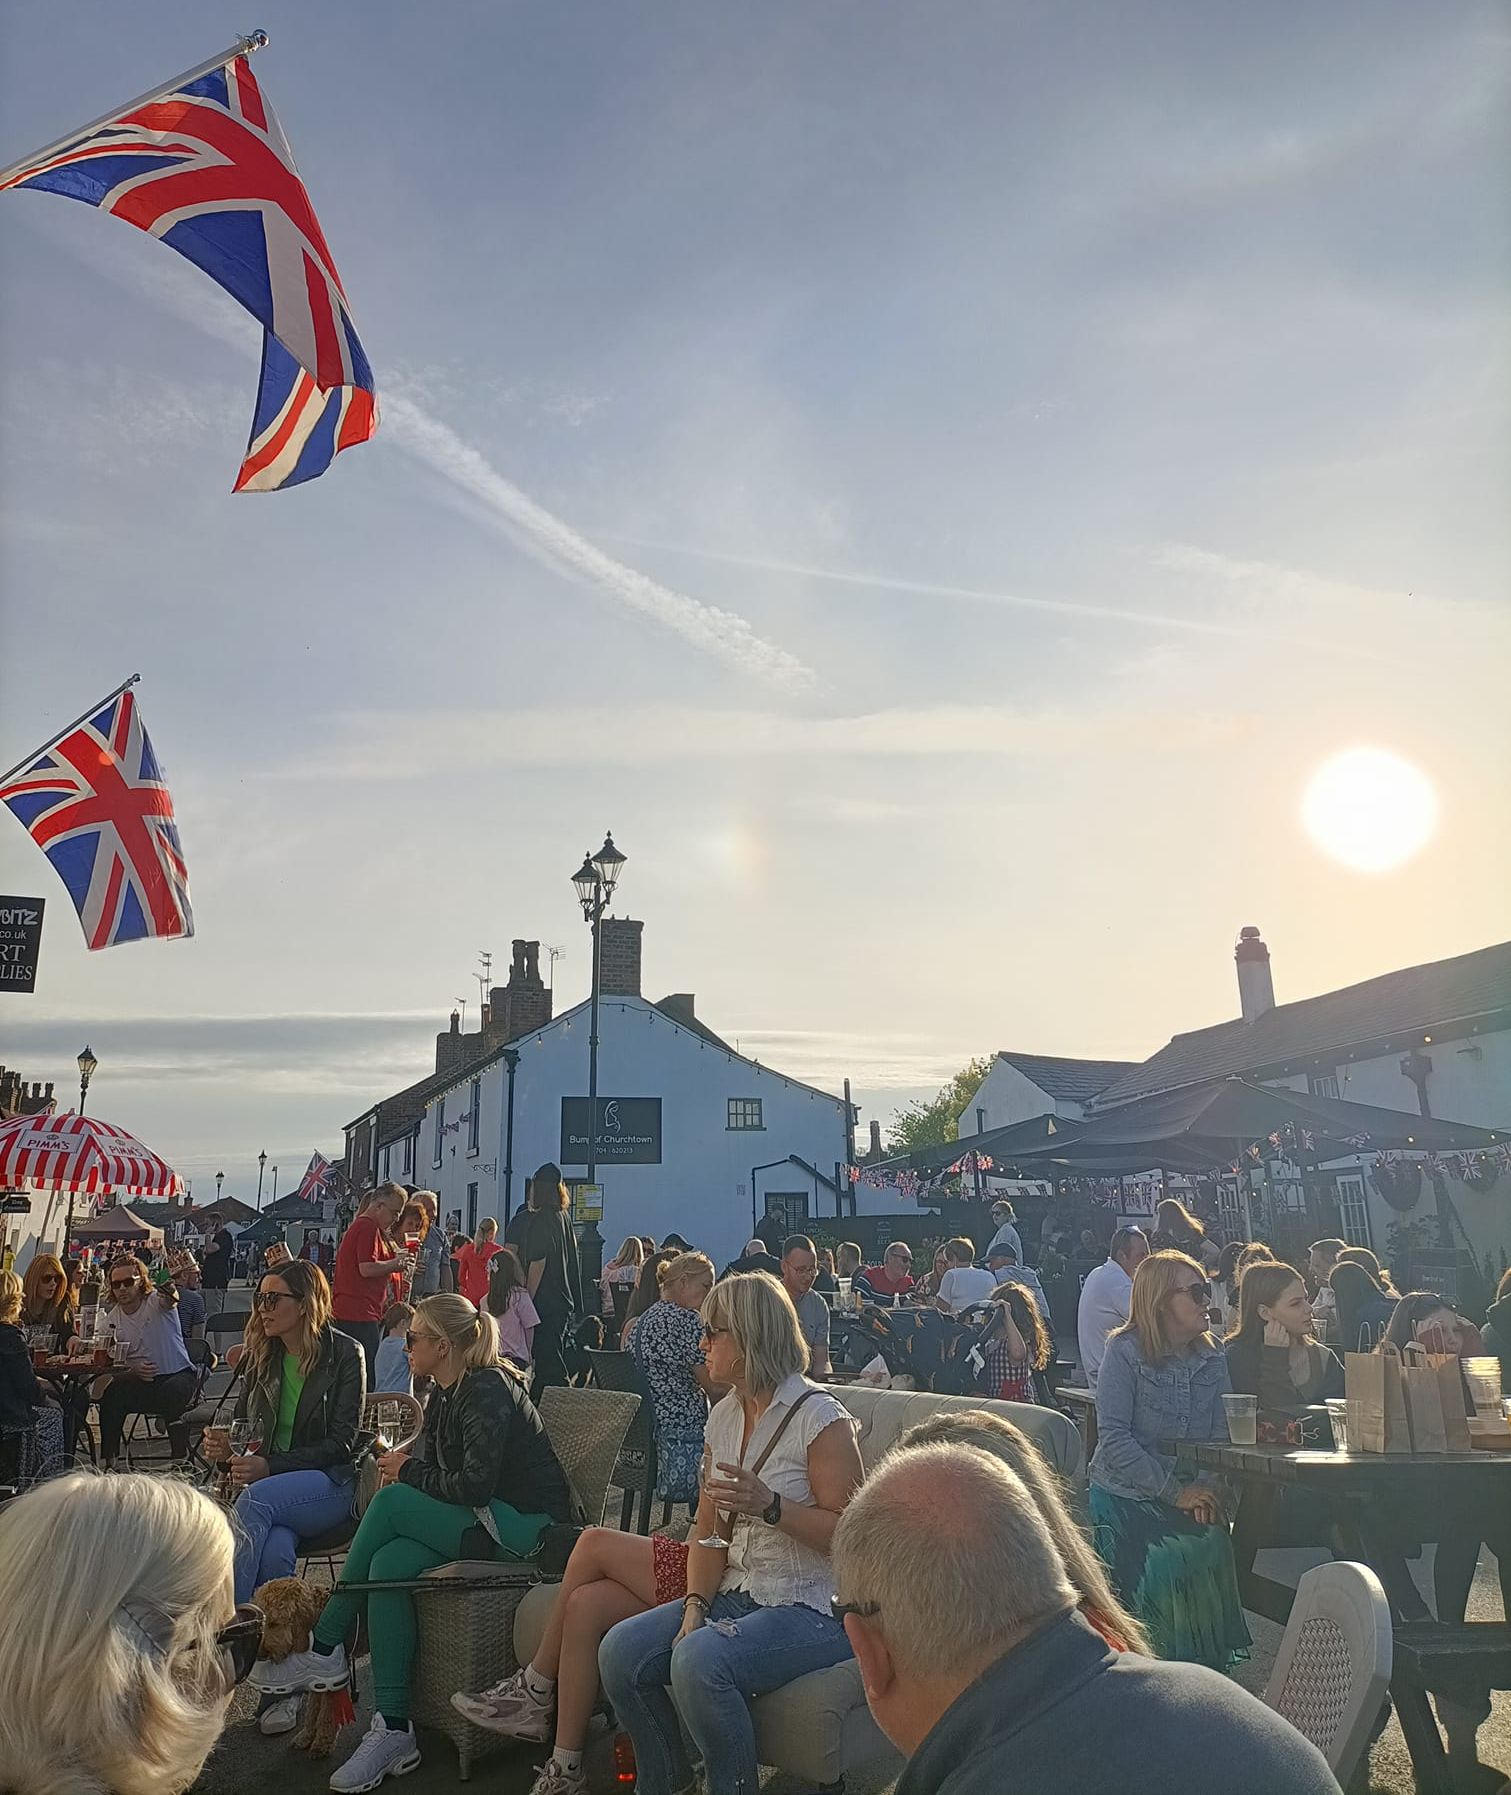 Crowds enjoy the King's Feast Coronation celebration in Churchtown Village in Southport. Photo by David Walshe